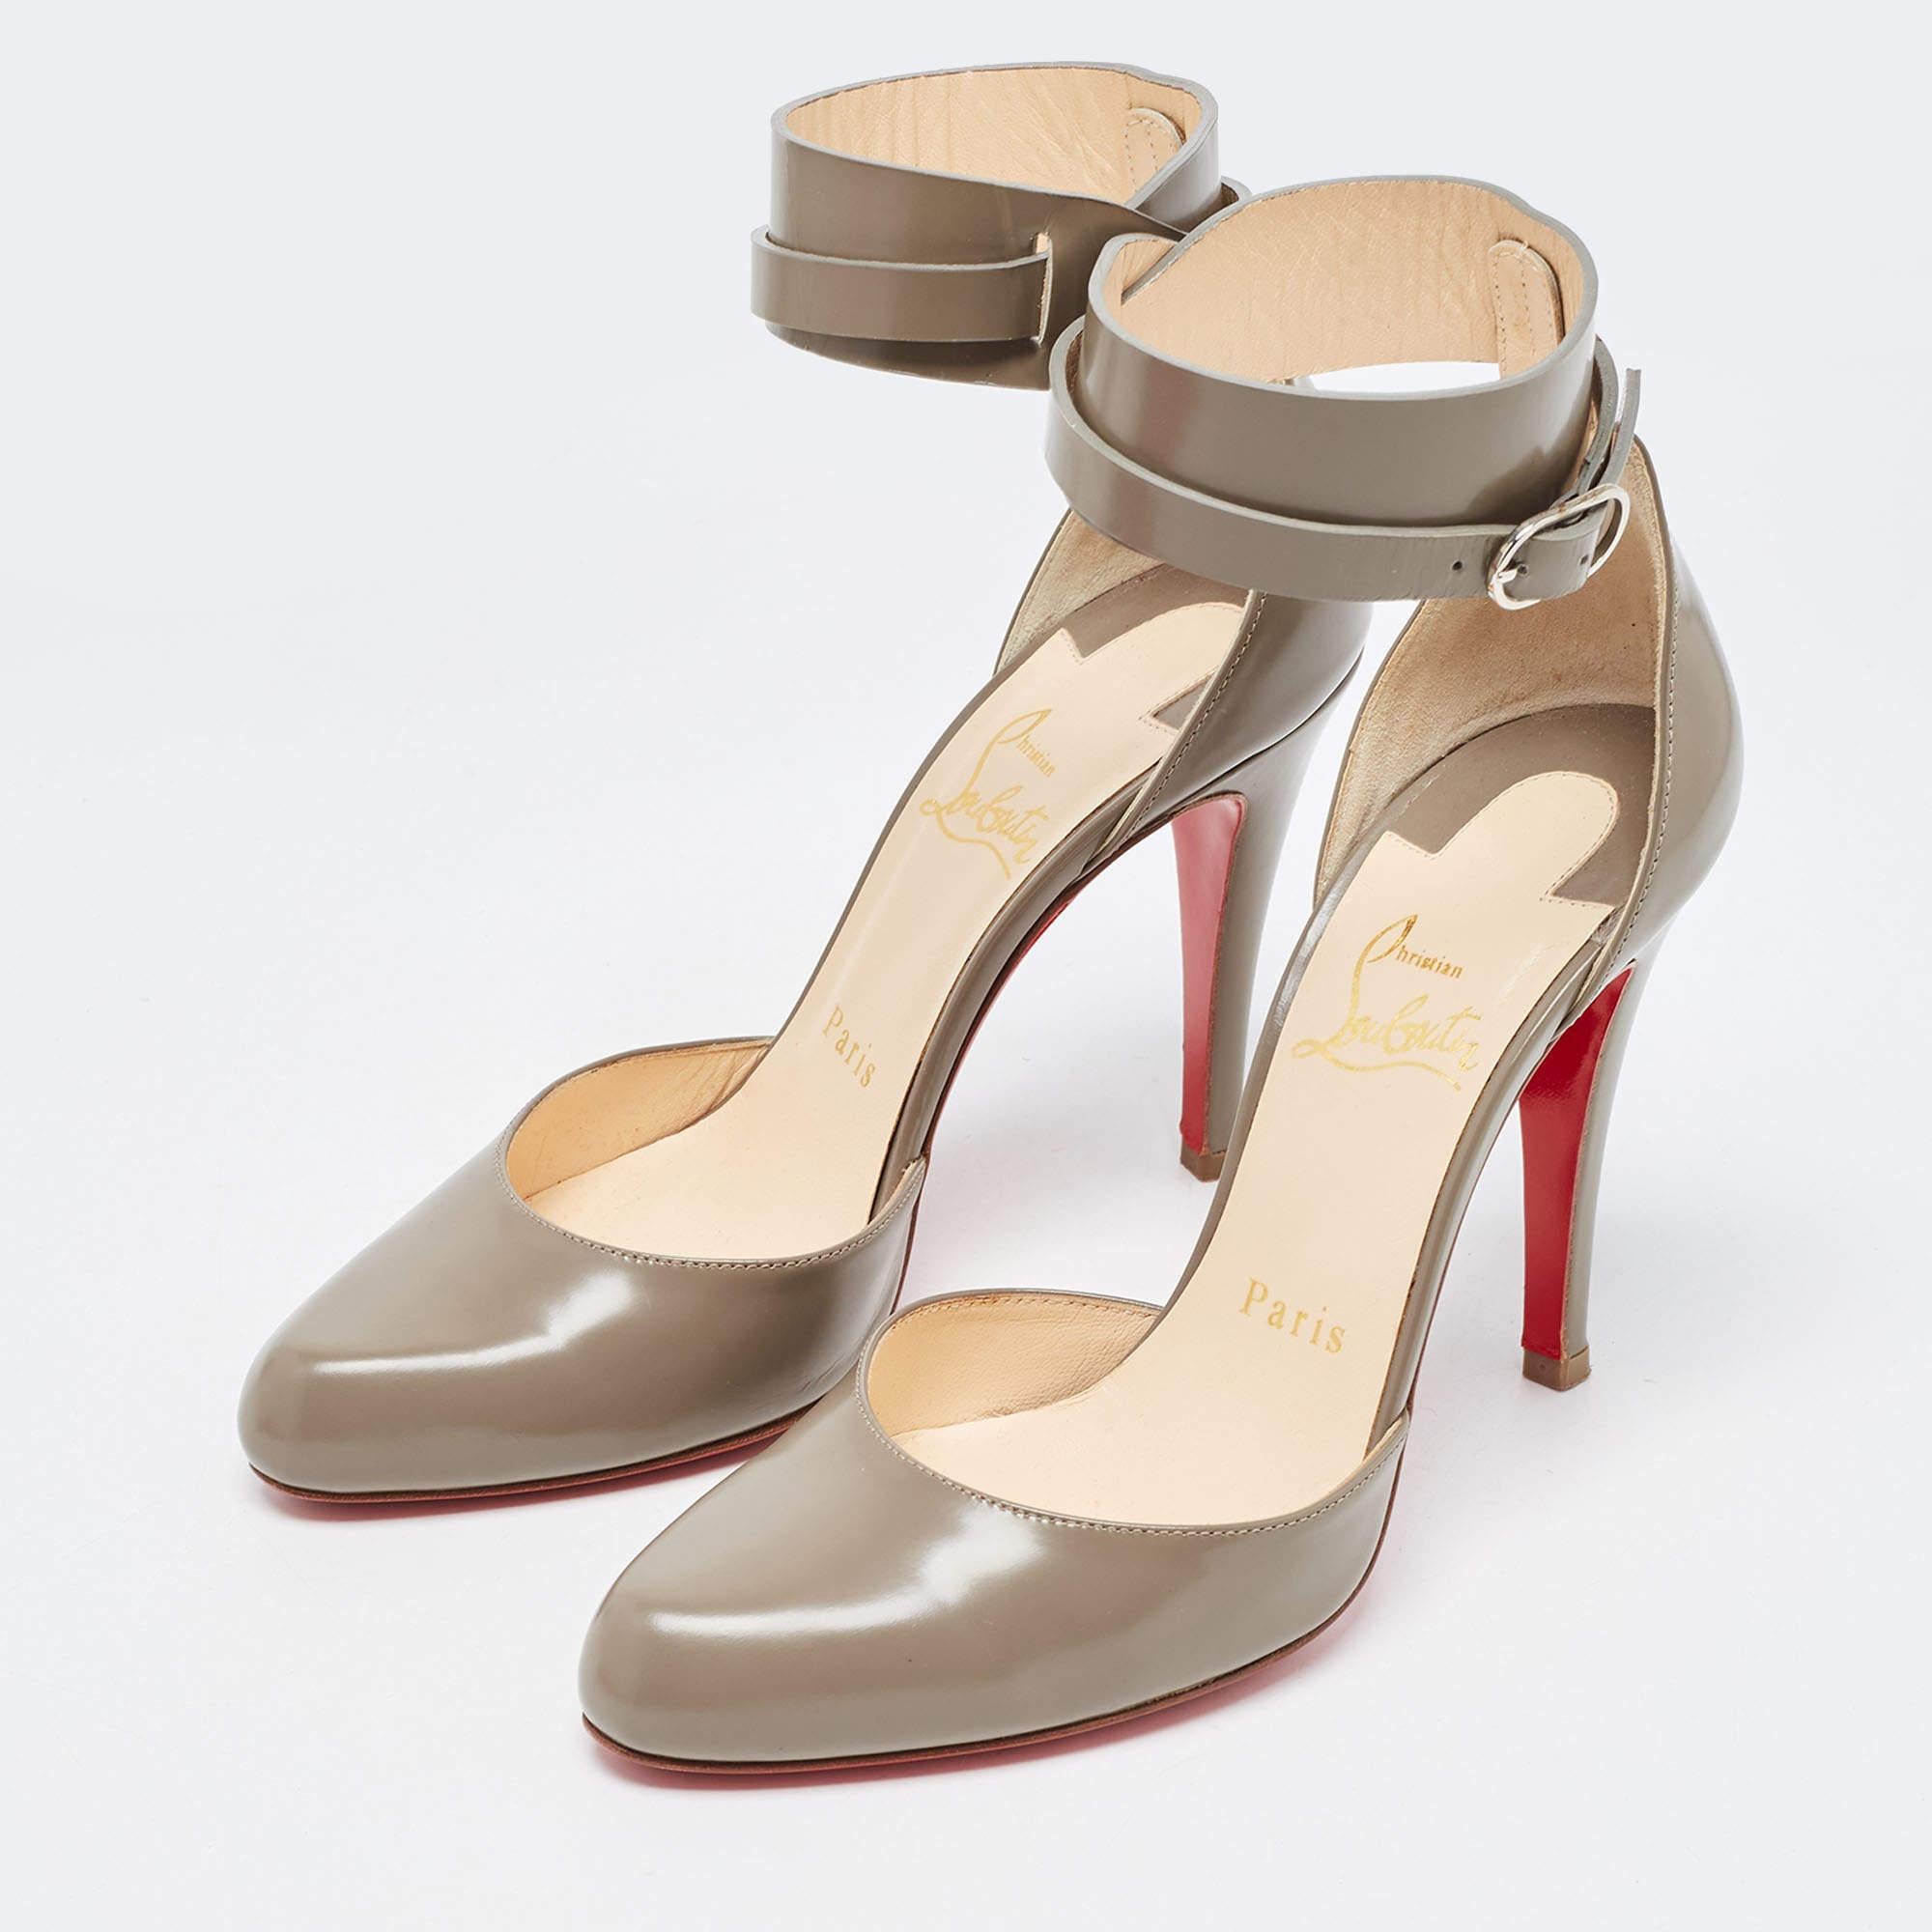 Christian Louboutin Grey Leather Bettina Ankle Strap Pumps Size 36.5 In Good Condition For Sale In Dubai, Al Qouz 2